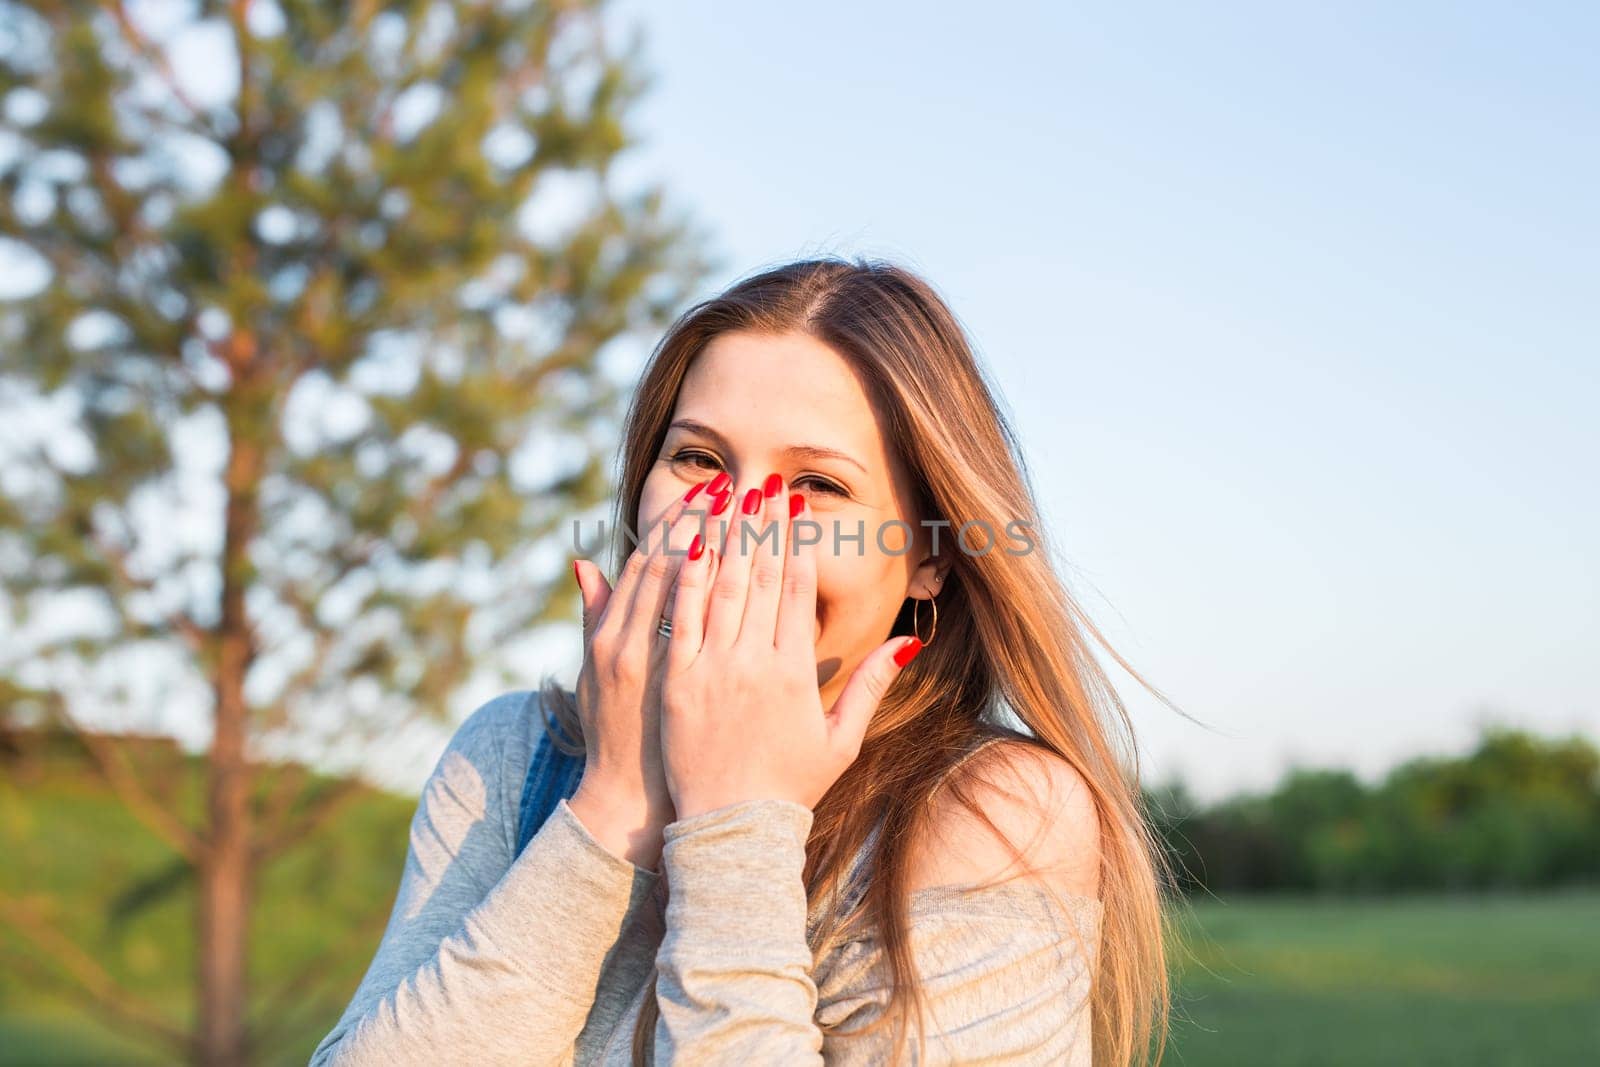 Surprised young woman with hands over her mouth outdoor.